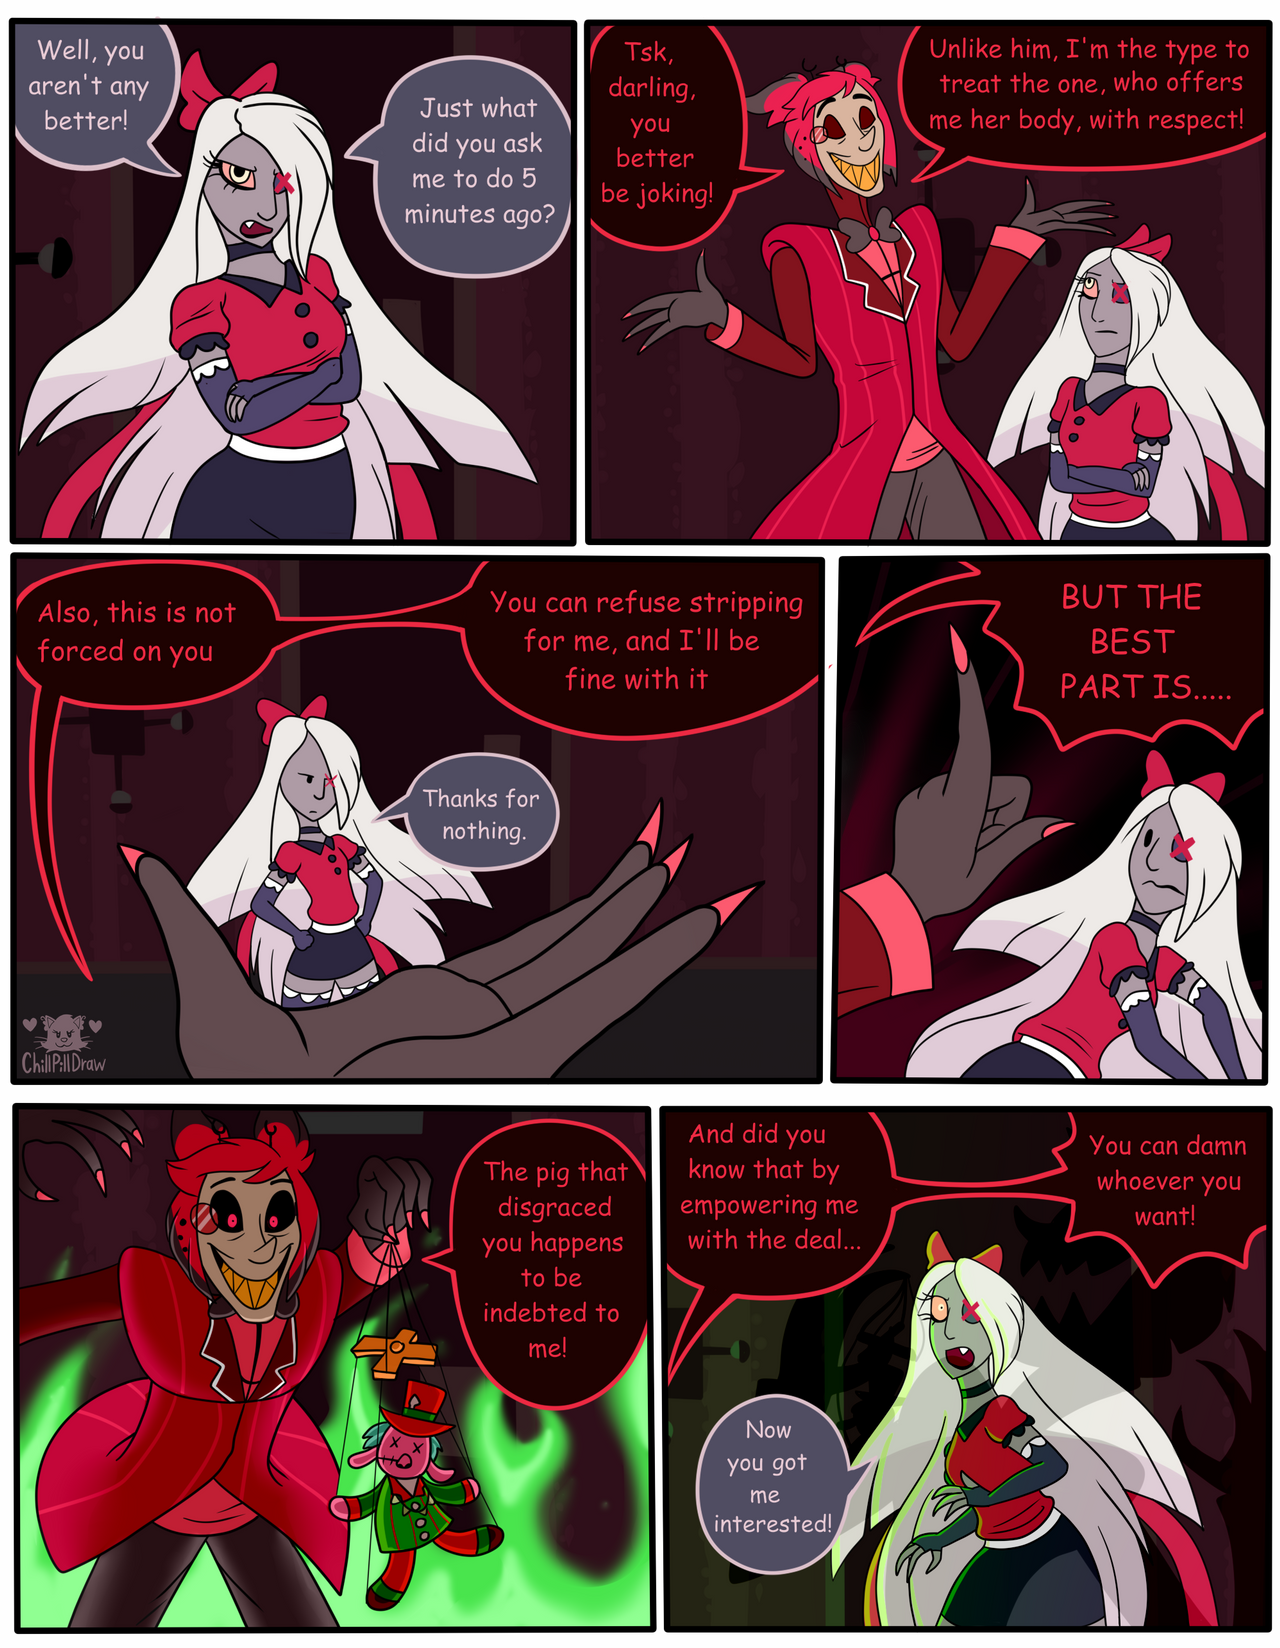 An intimate deal - page 8 by ChillPill-Draw on DeviantArt